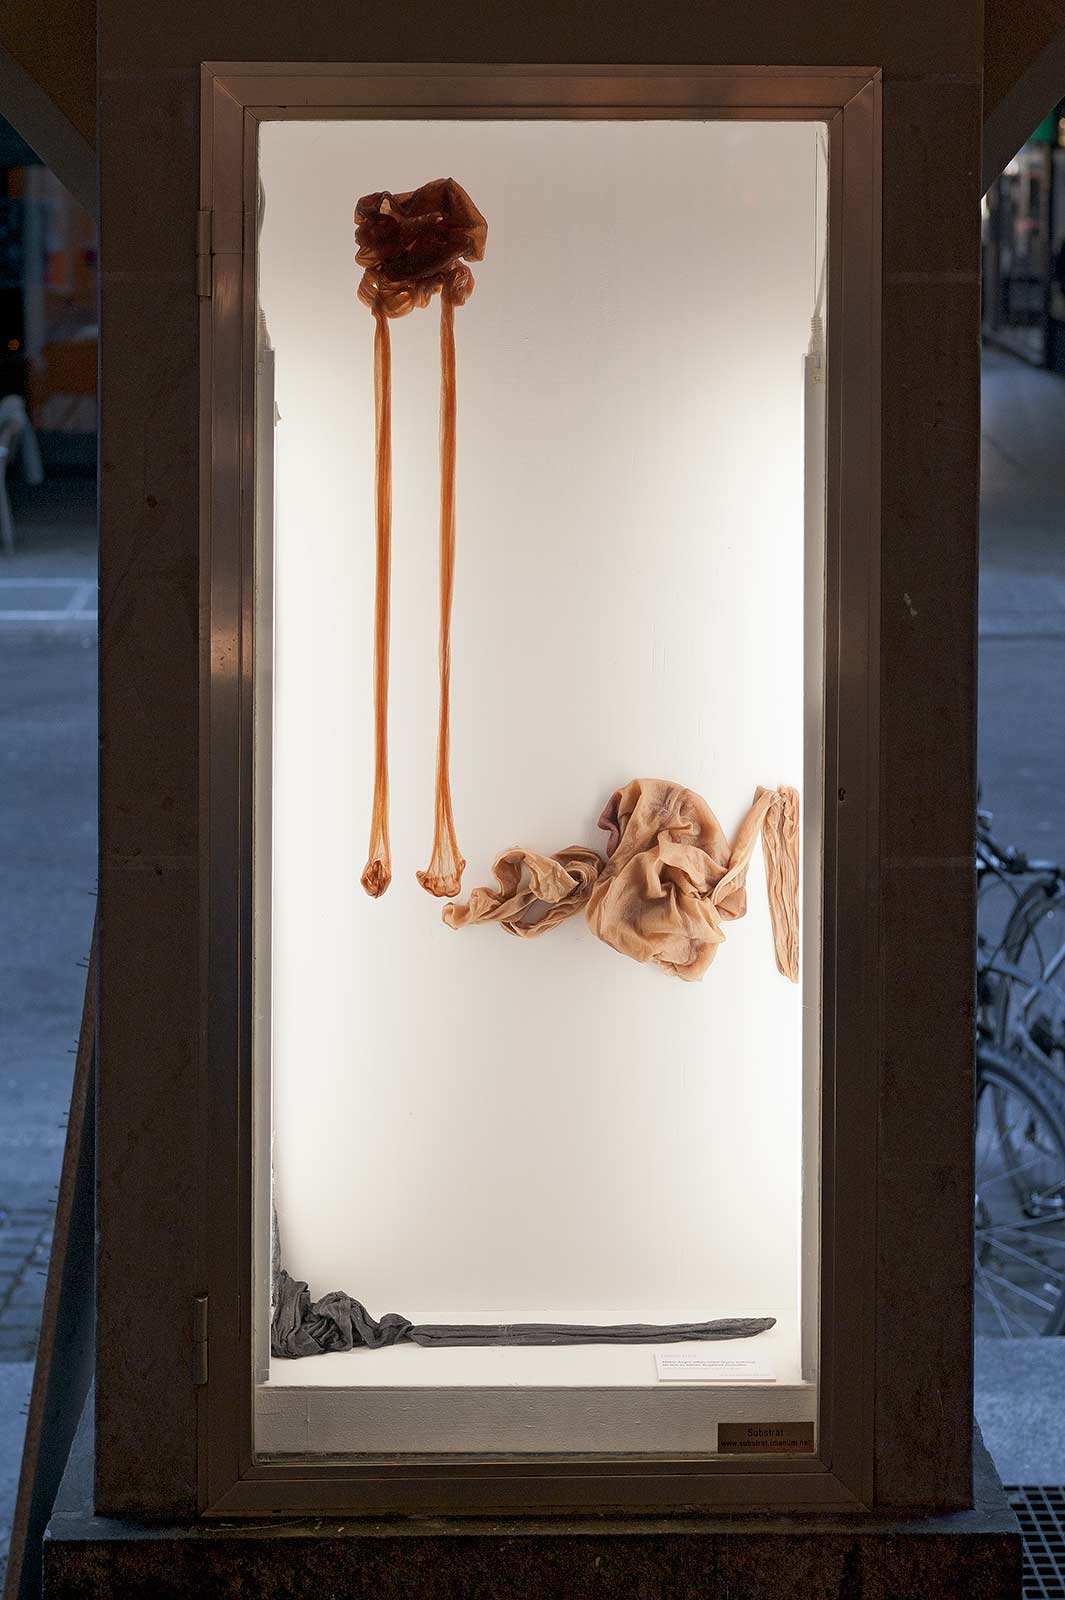 Art installation in a glass case with objects made of nylon tights and epoxy resin